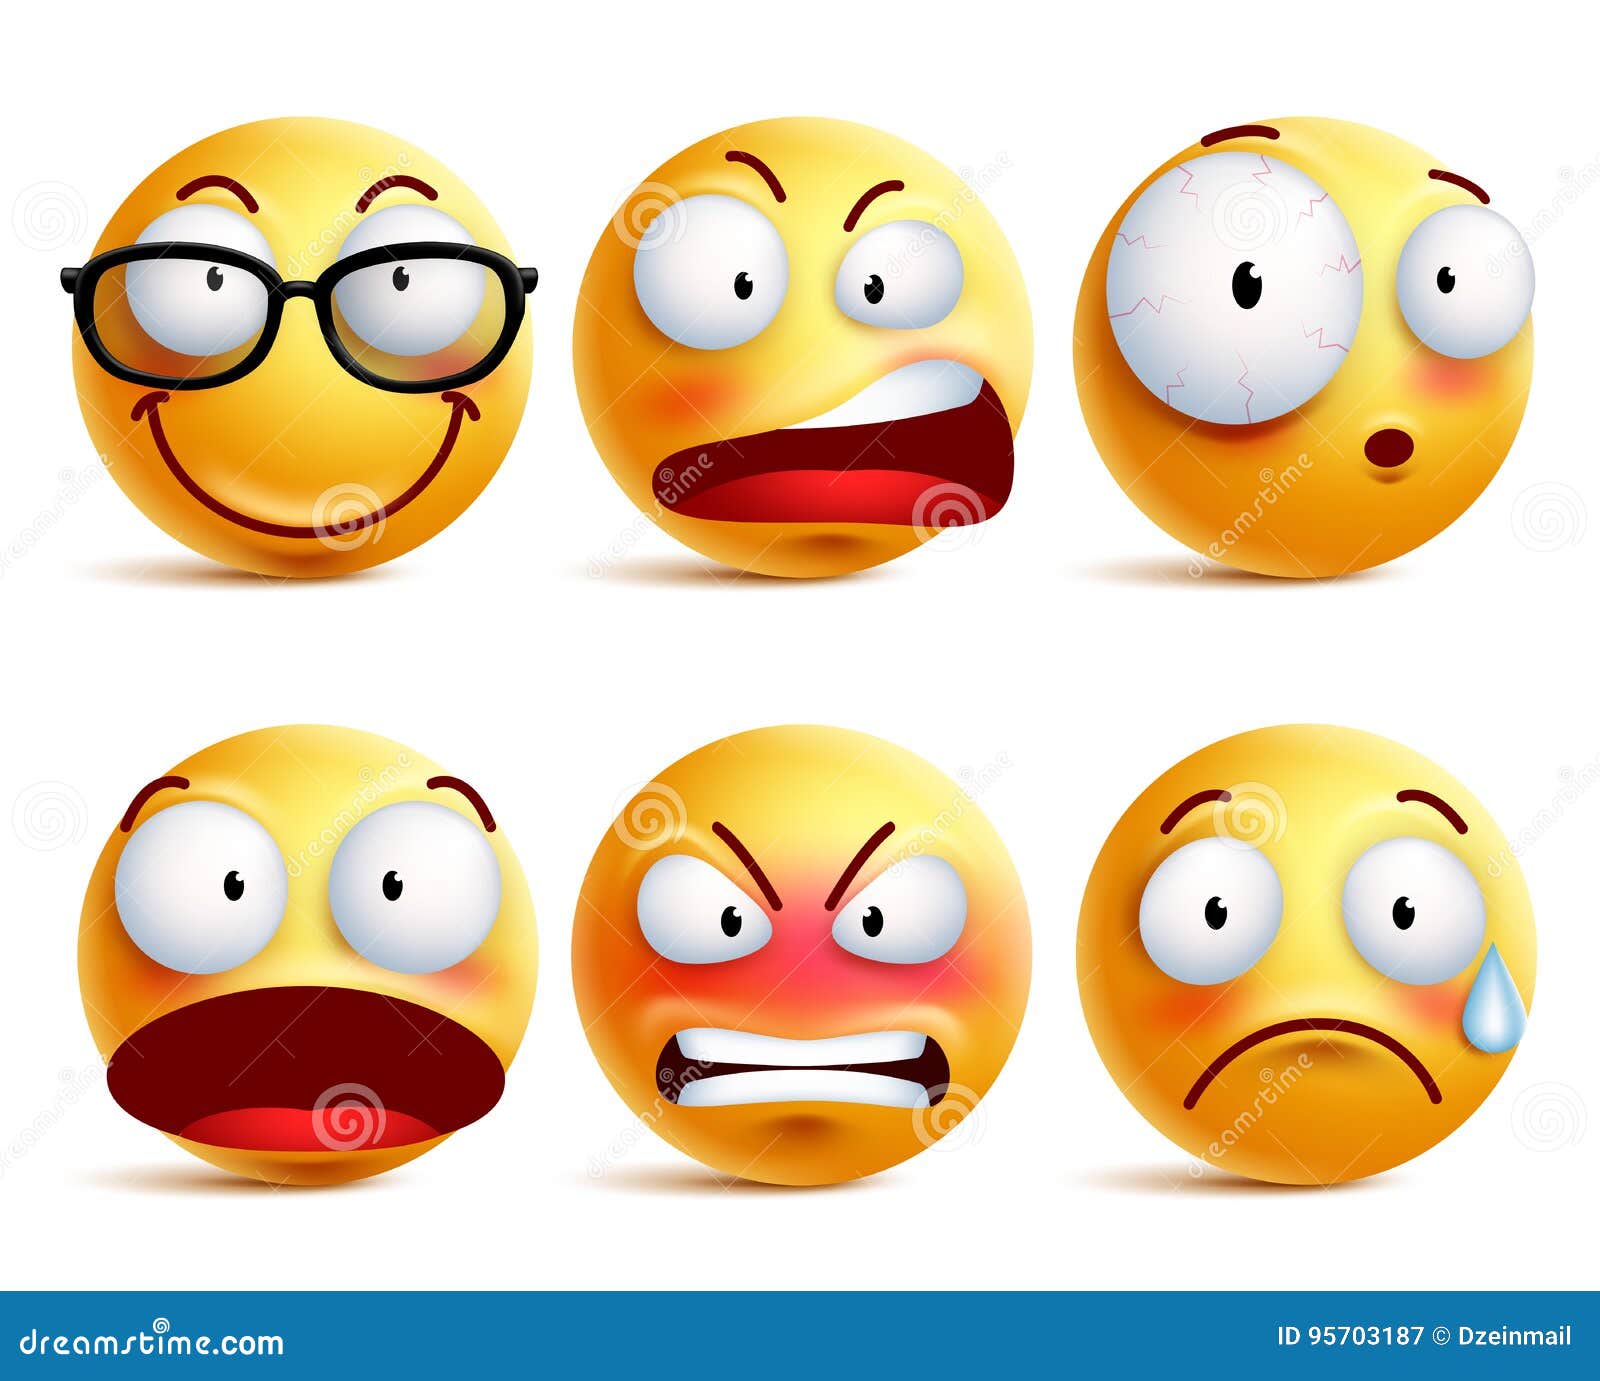 smiley face or emoticons  set in yellow with facial expressions